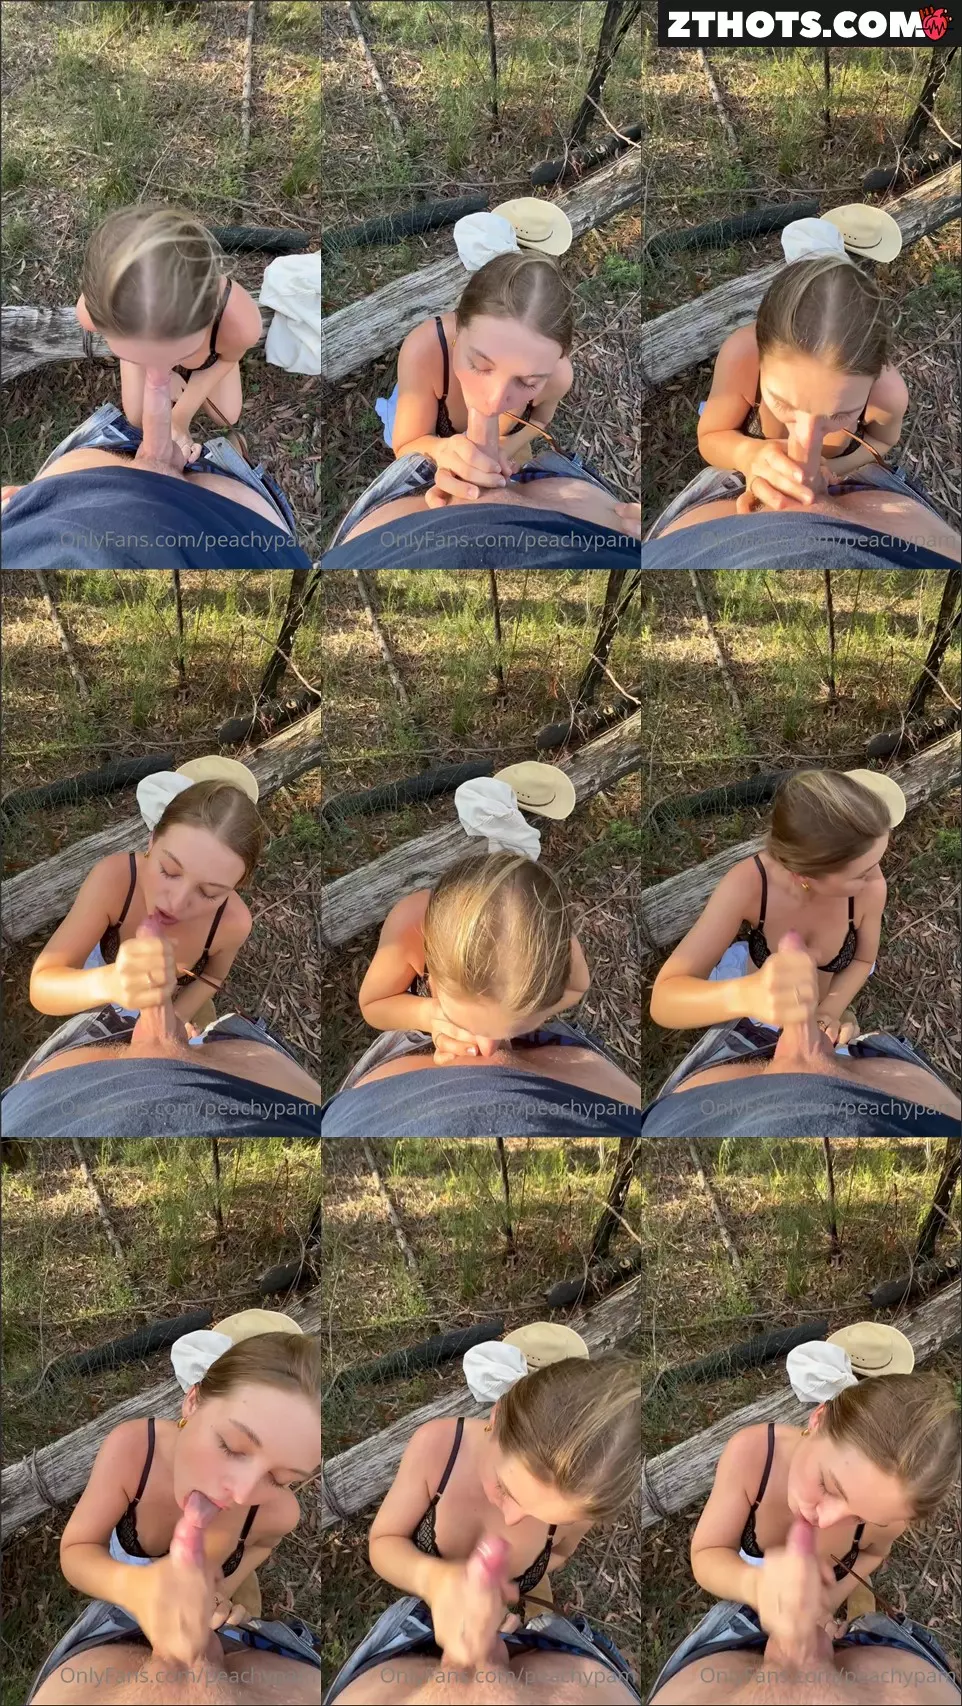 Peachypam Sucking Dick In The Forest